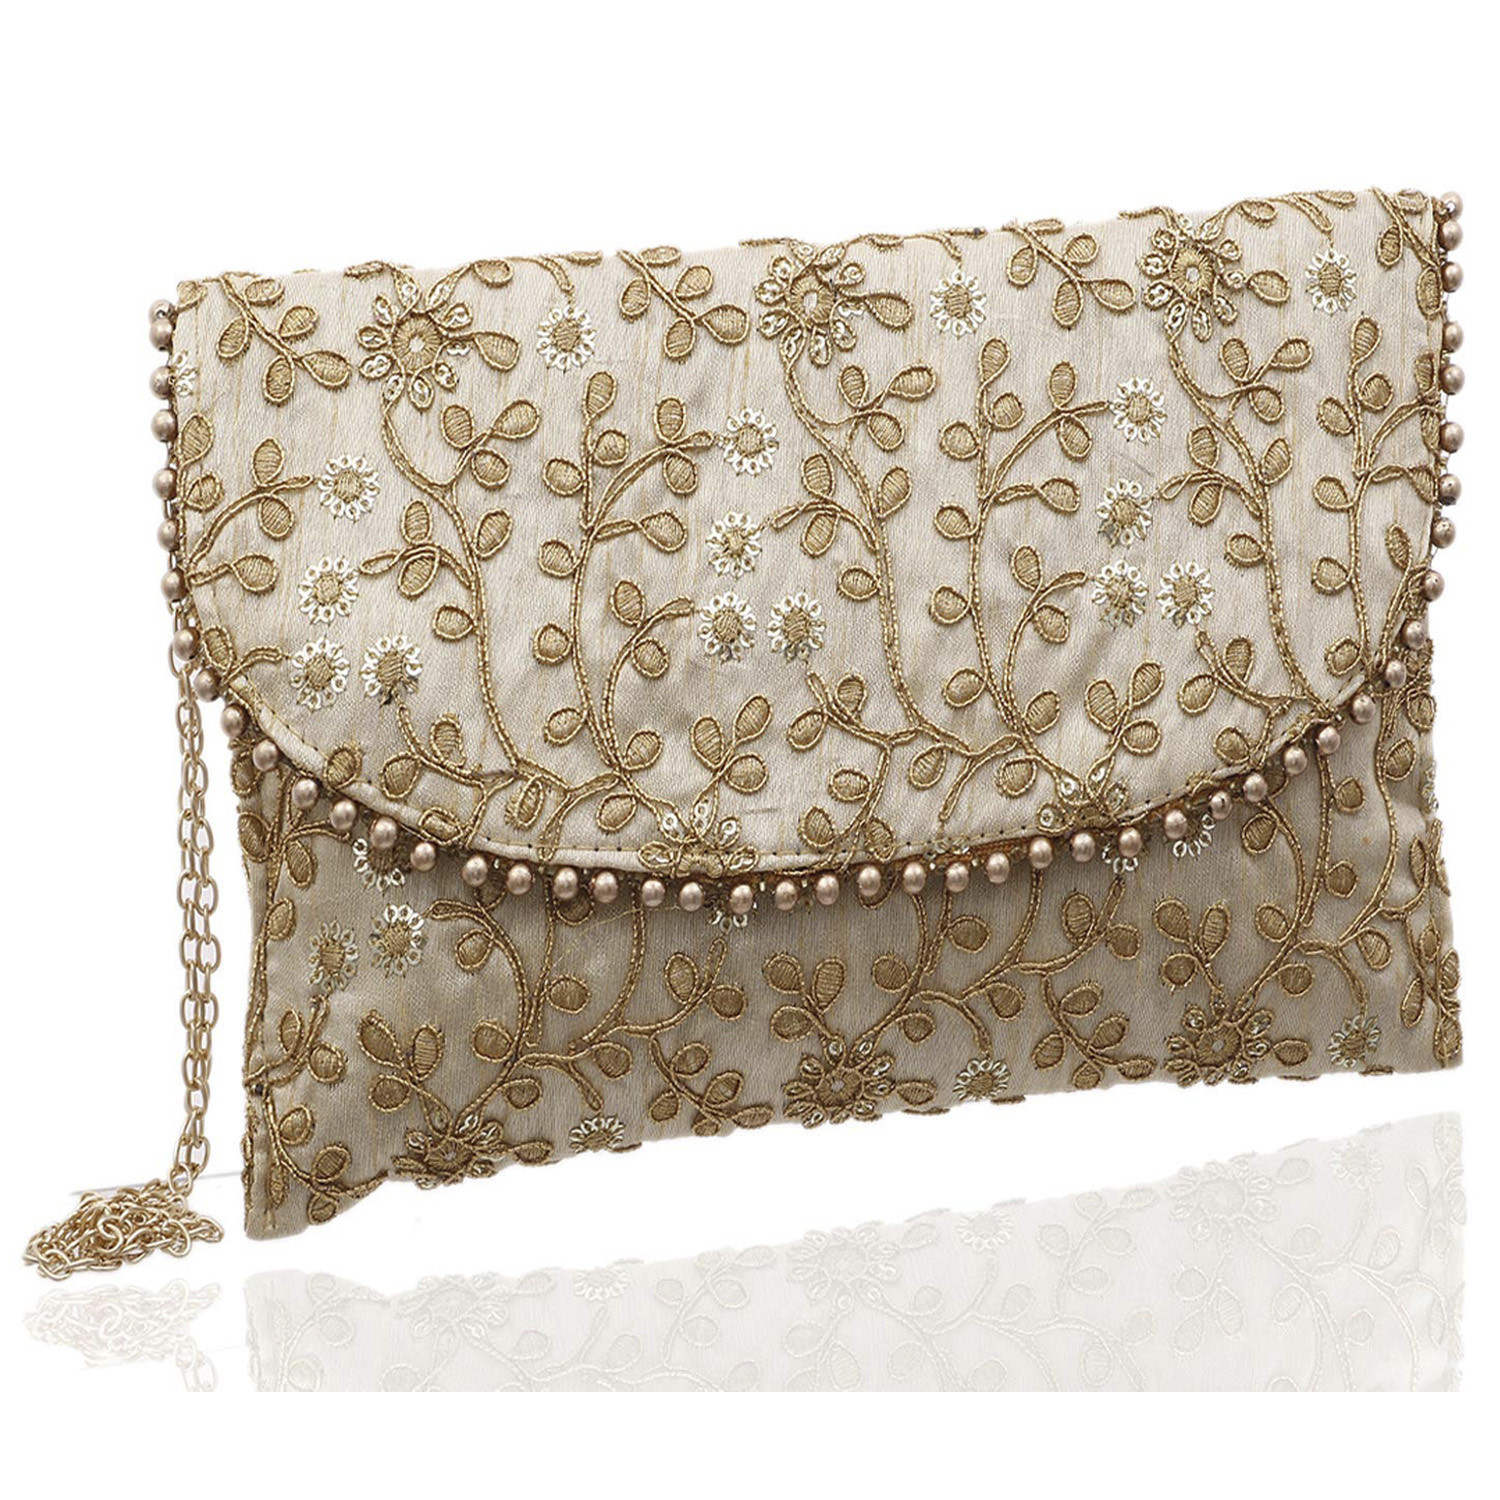 Kuber Industries Embroidery Golden Pearl Border Clutch|Hand Purse & Pearls Handle With Magnetic Lock For Woman,Girls (Cream)